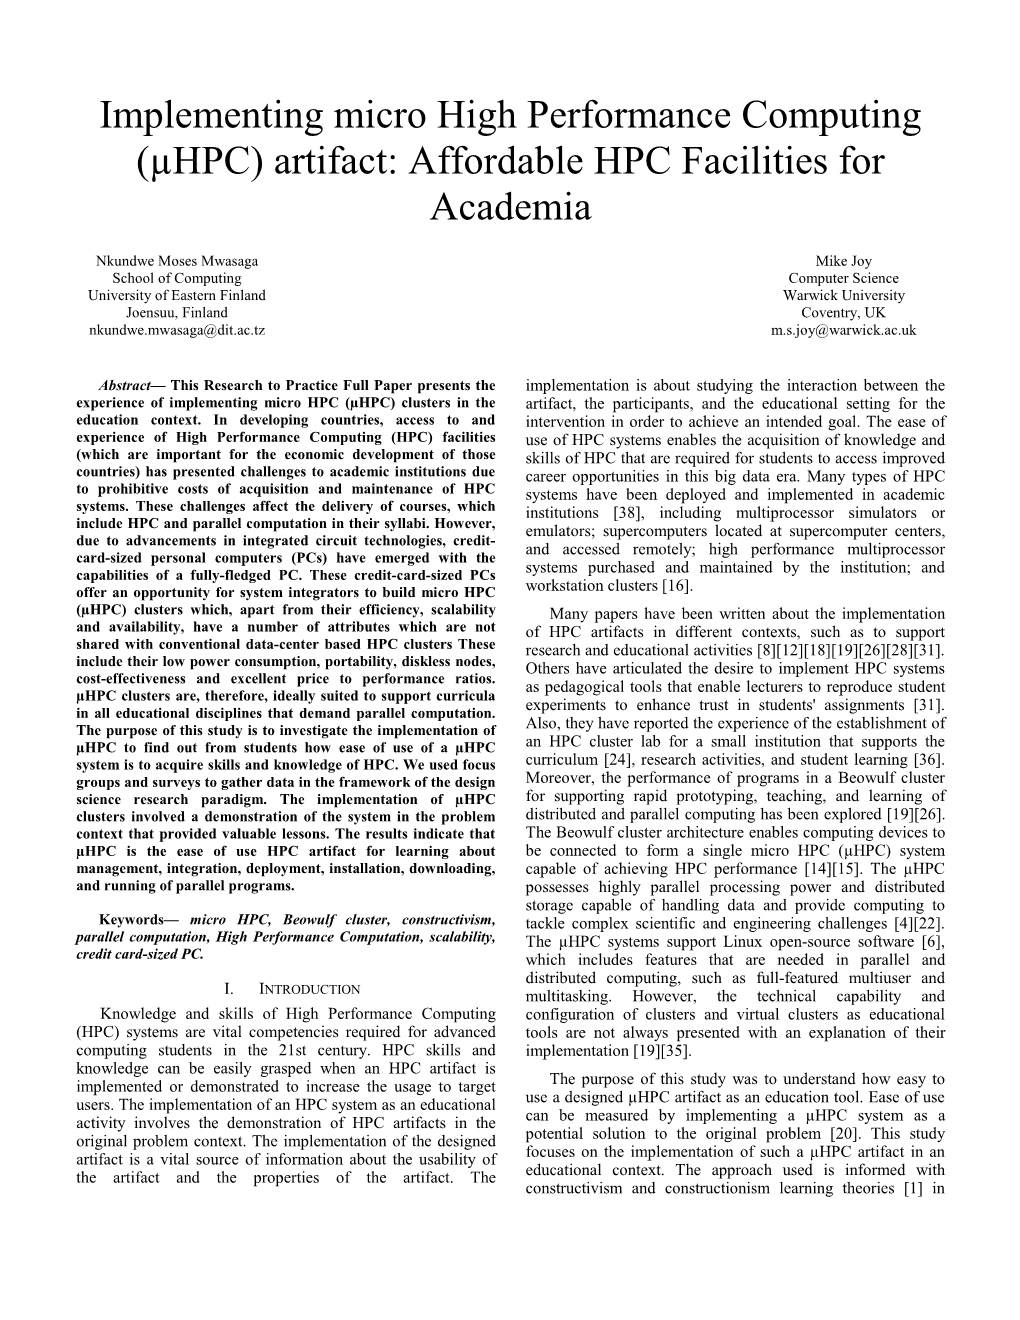 Implementing Micro High Performance Computing (Μhpc) Artifact: Affordable HPC Facilities for Academia